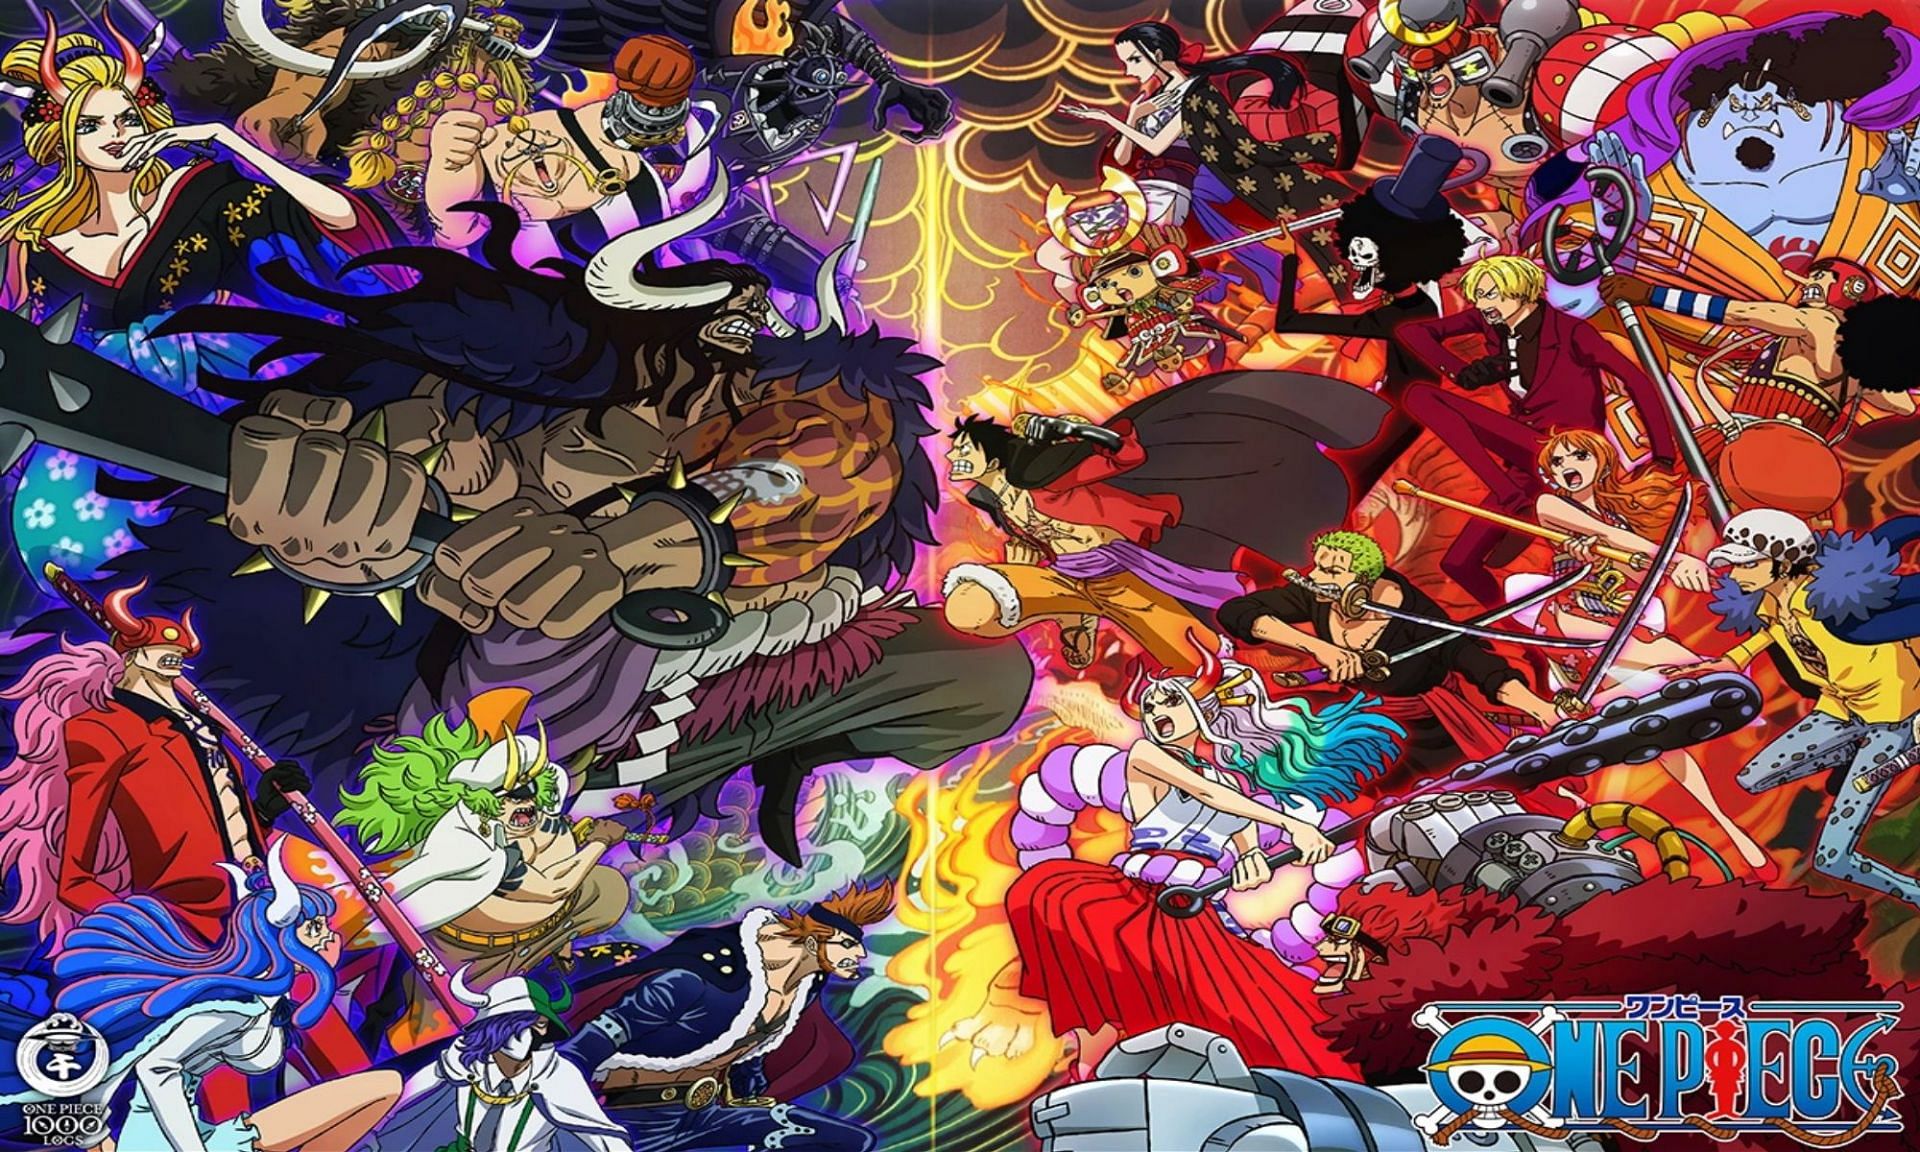 10 reasons why Wano Country is the best One Piece arc post timeskip